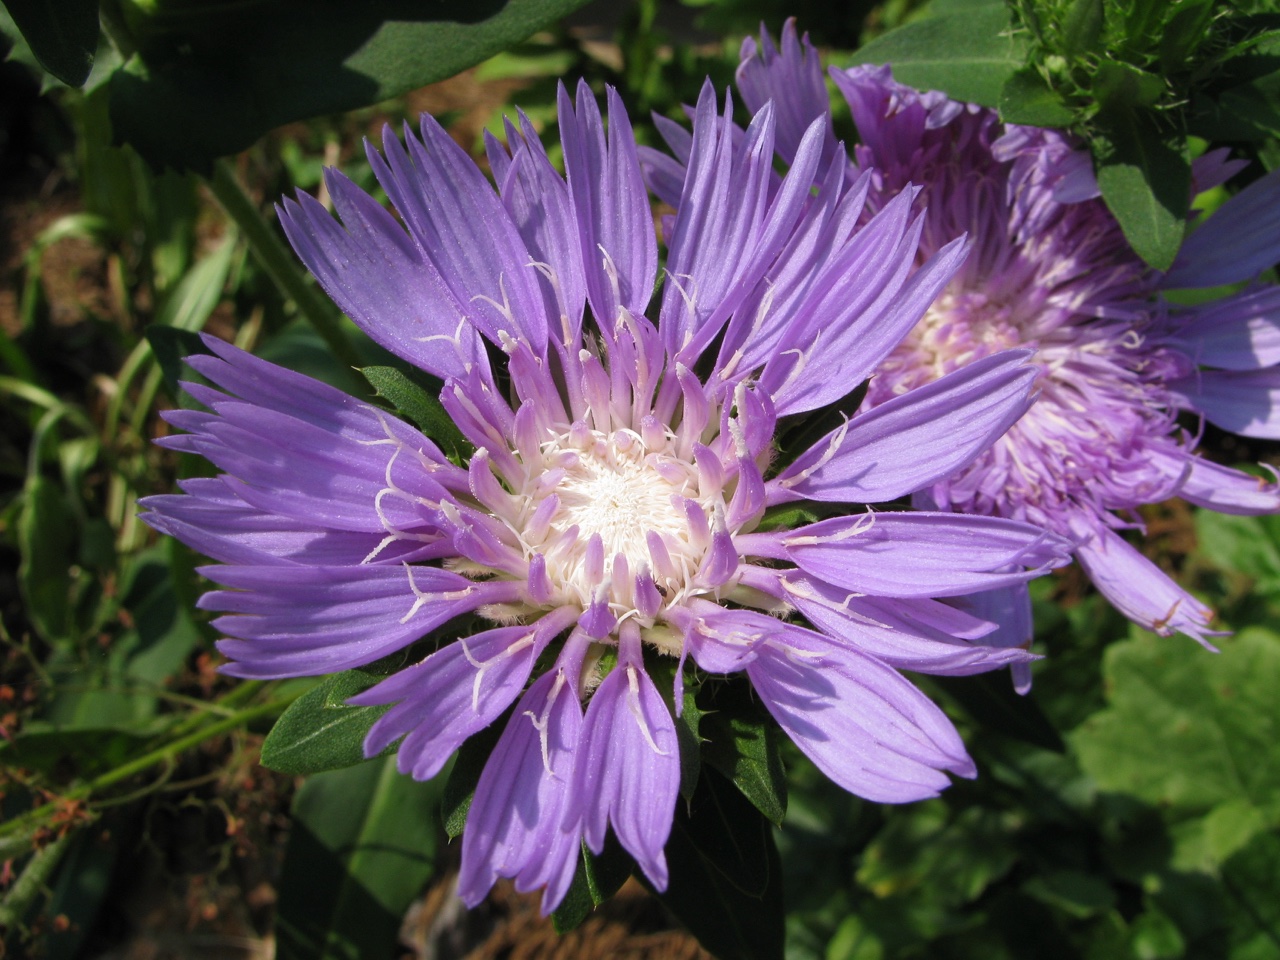 The Scientific Name is Stokesia laevis. You will likely hear them called Stokes Aster, Stokesia, Blue Stokesia, Stokes's Aster, Cornflower Aster. This picture shows the Close-up of large (2-2.5 inches) flower head of Stokesia laevis